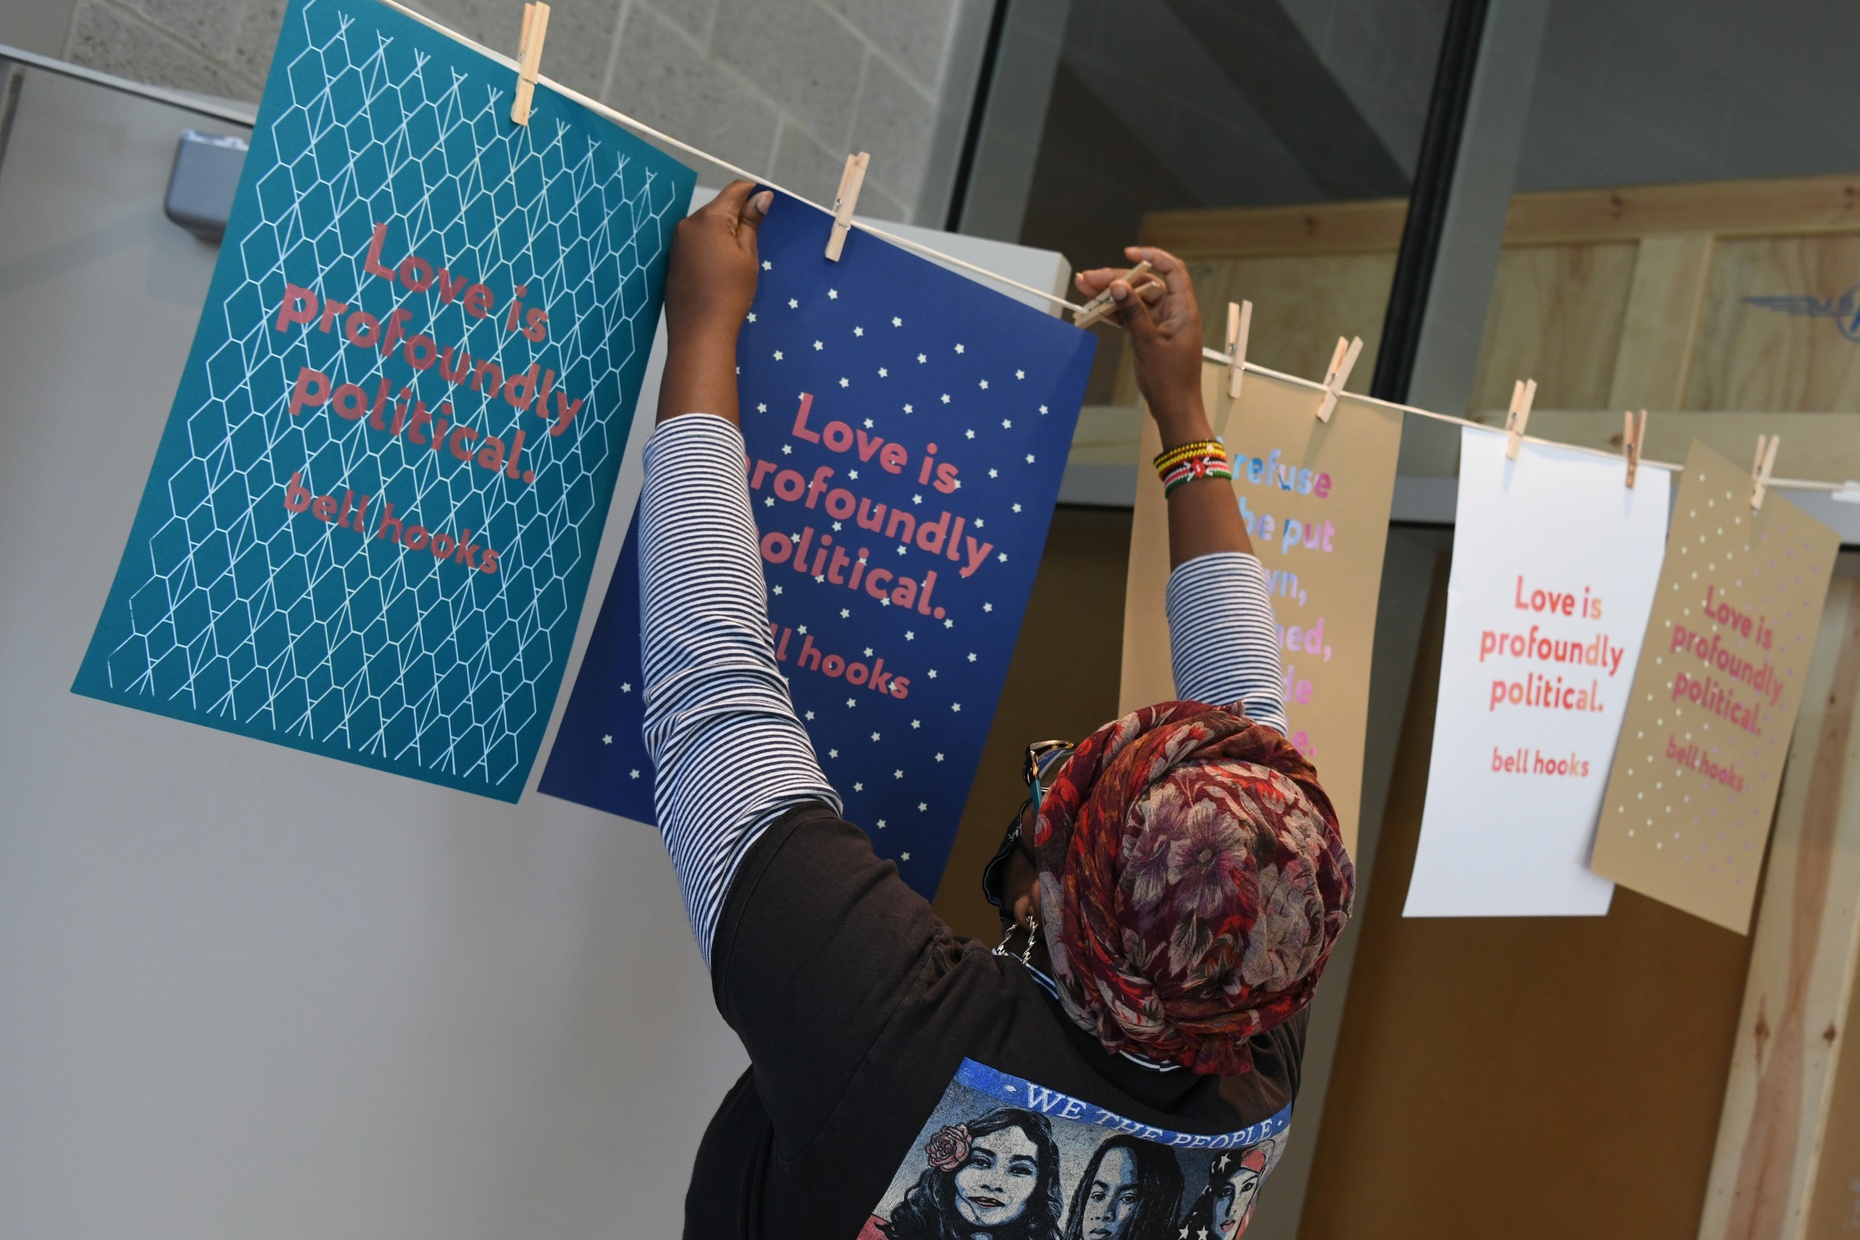 A student, with her back to us, reaches up to hang a poster to dry on a clothesline. The poster most visible reads "Love is profoundly political. bell hooks".